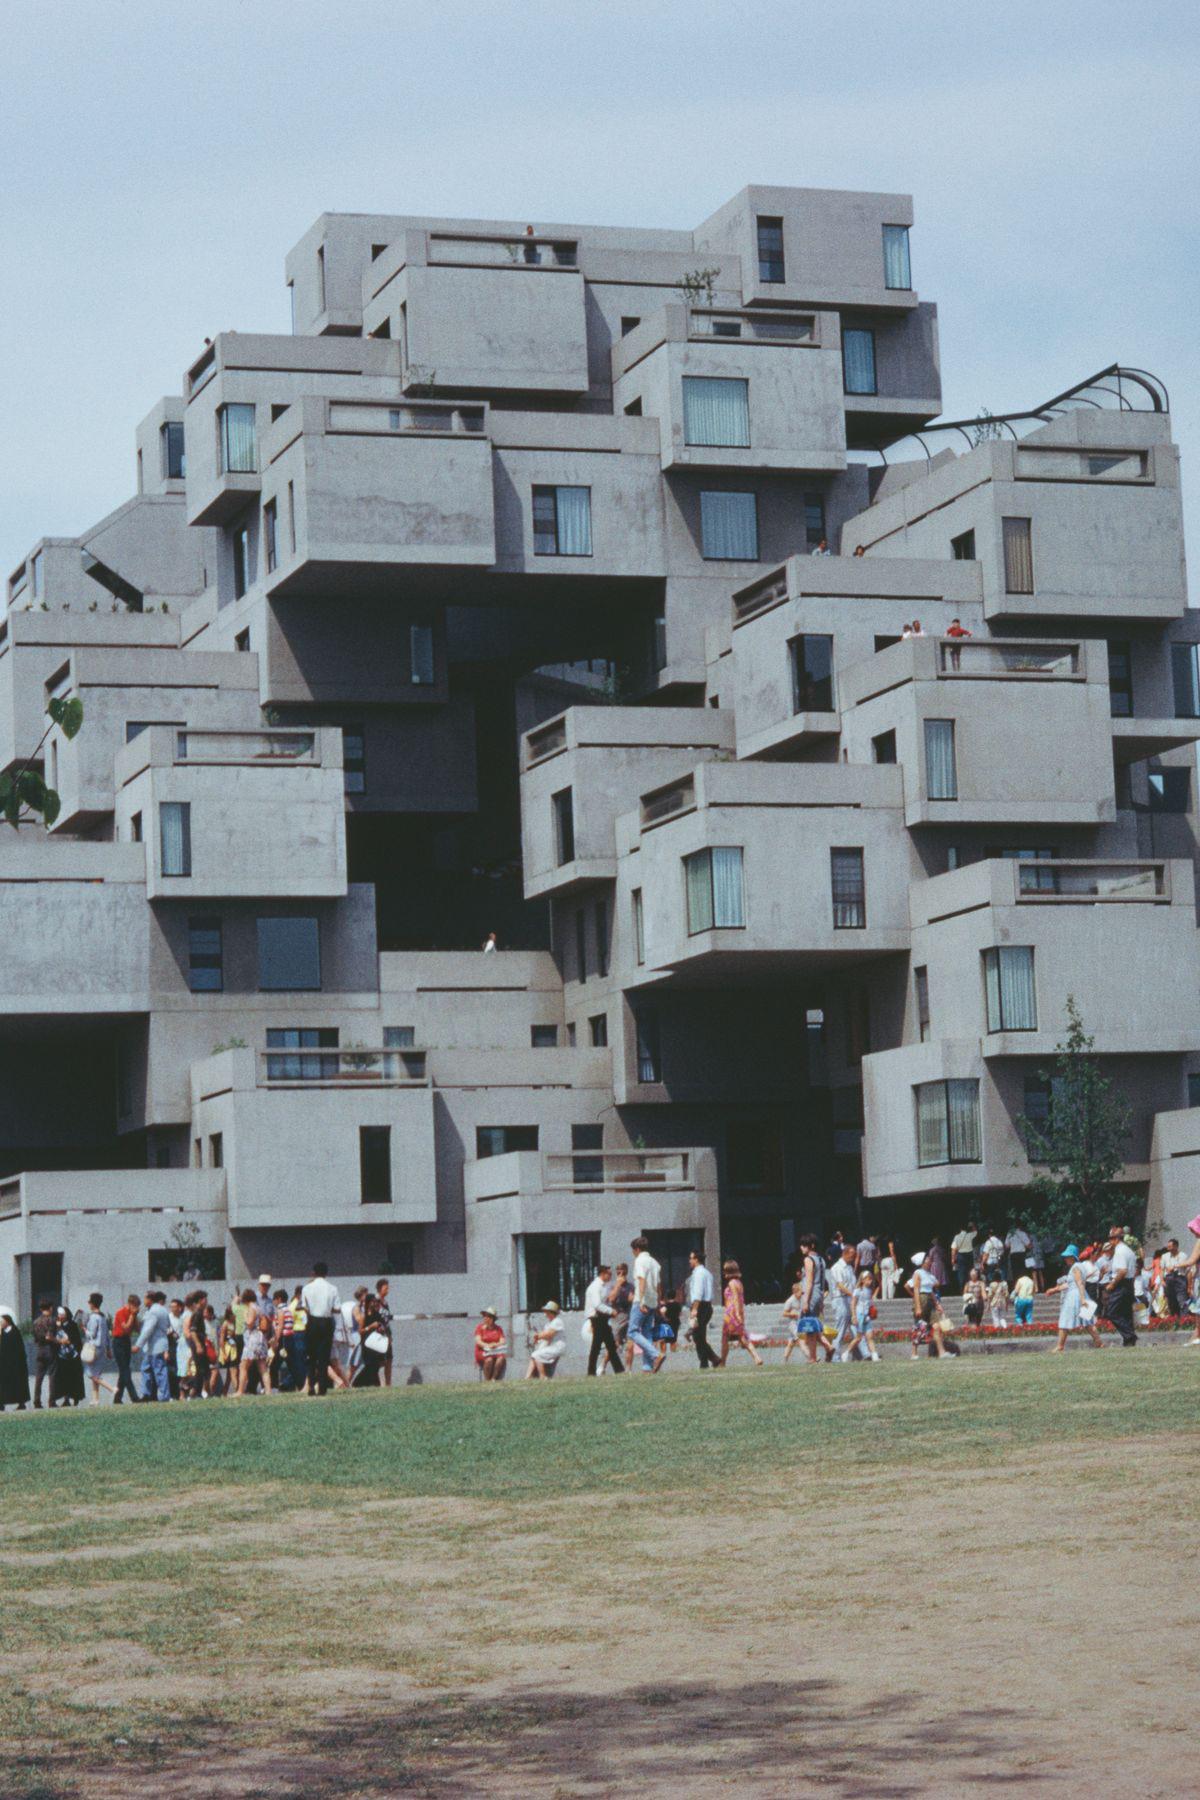 Habitat 67, first introduced at the Expo World's Fair in 1967. It still houses residents to this day.